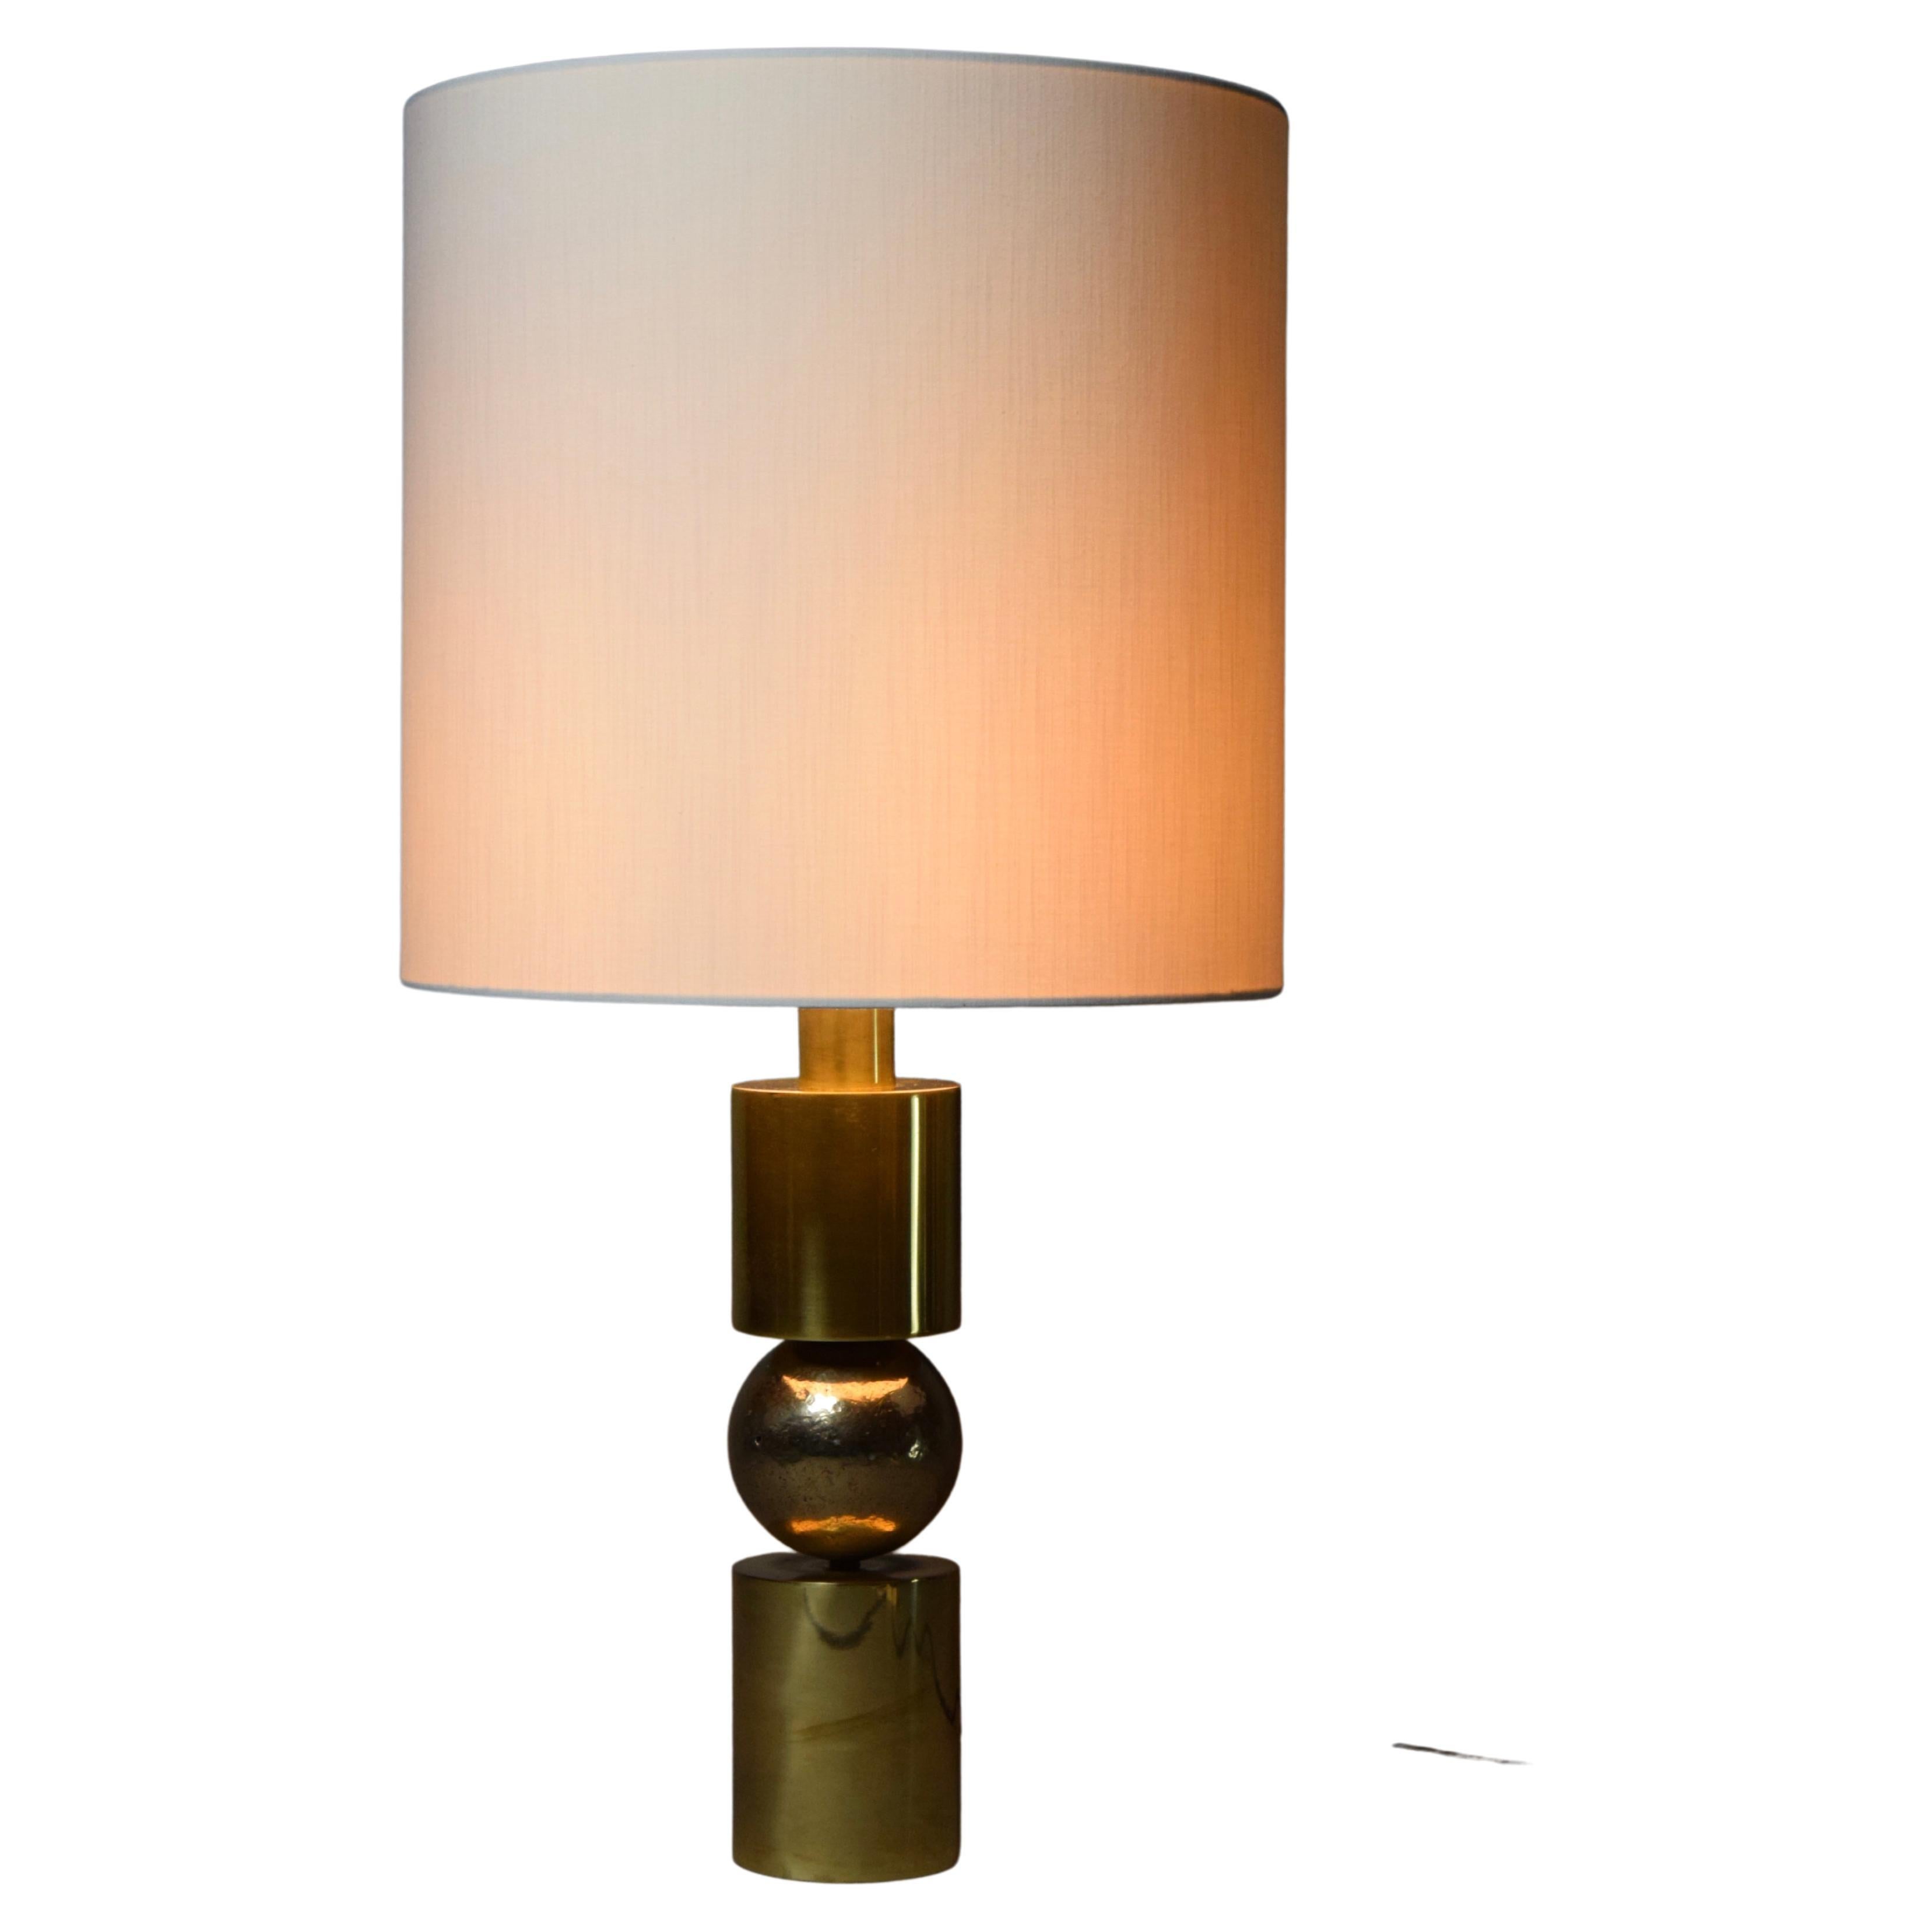 Italian Late 1960s Brass Table Lamp with Ivory Colored Shade